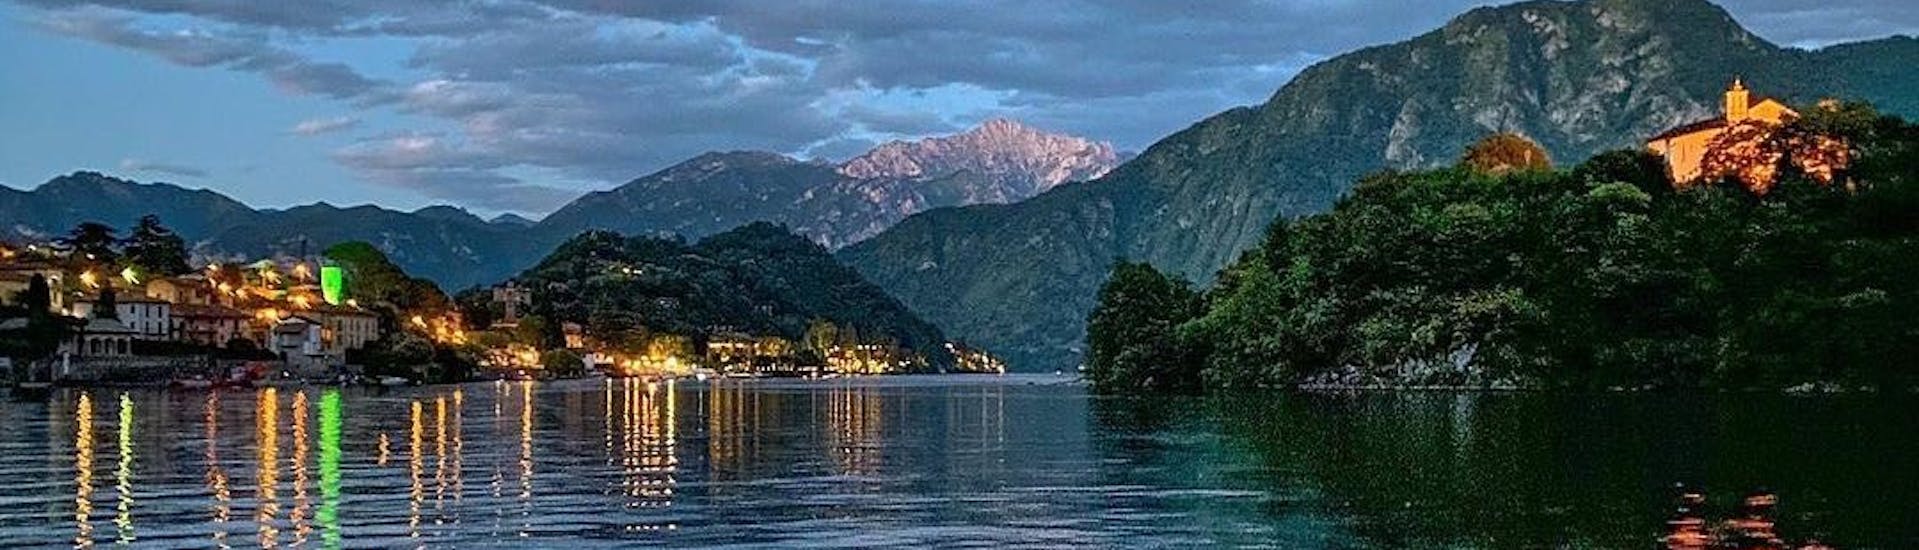 Private Boat Trip around Lake Como with Apéritif & Optional Lunch.